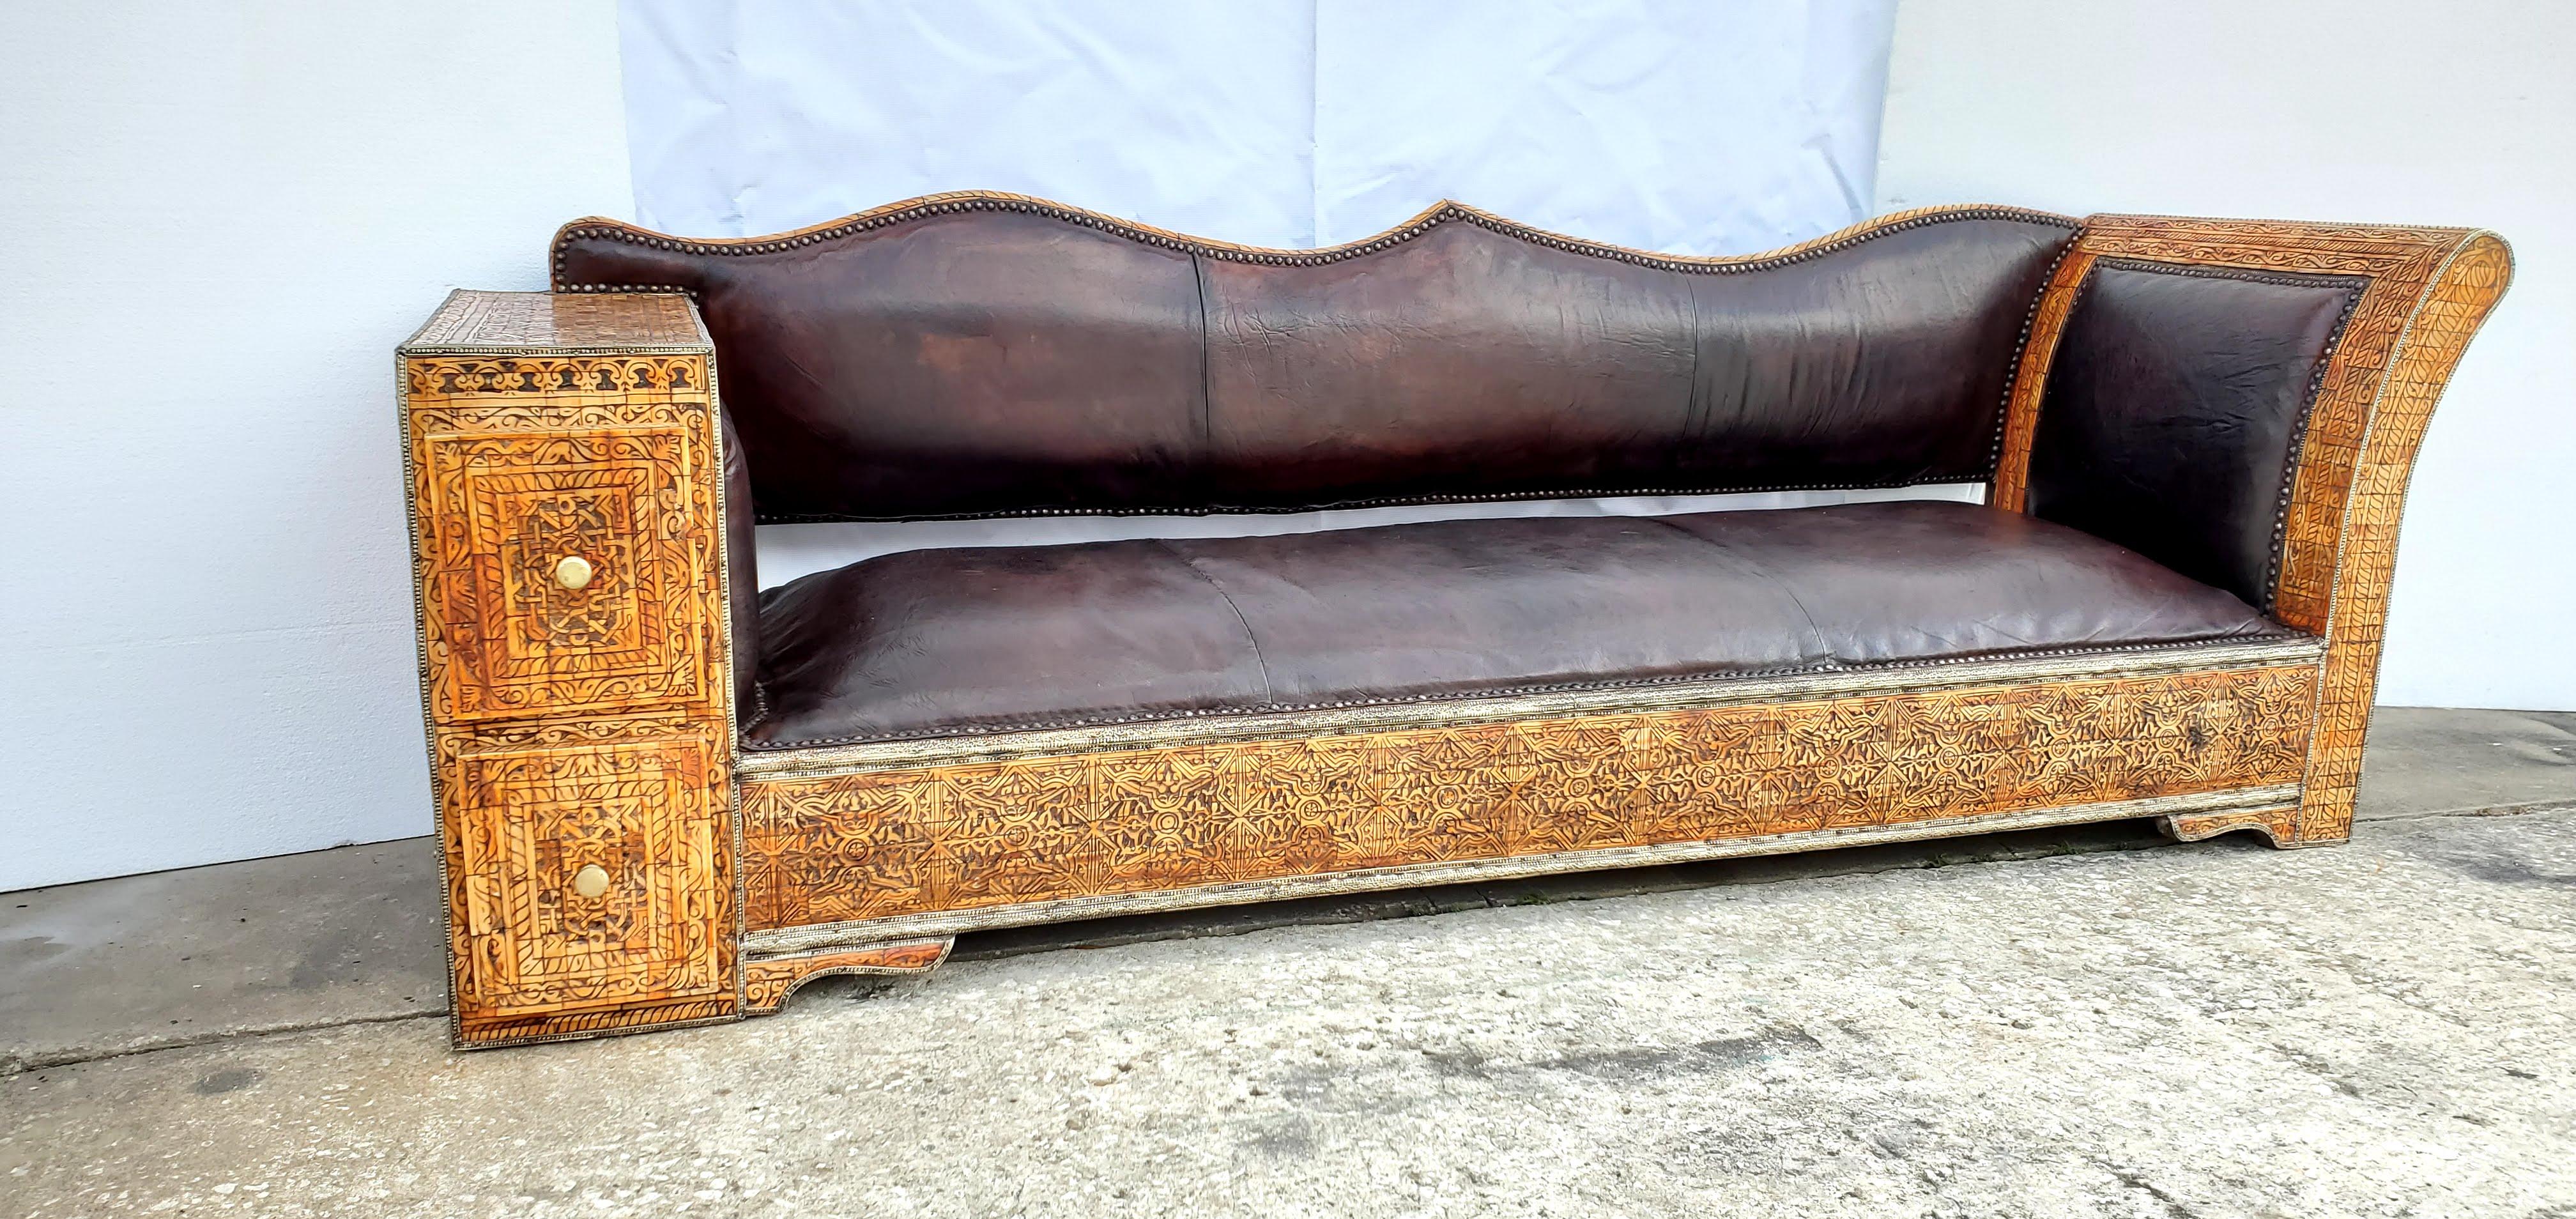 20th Century Rare and Unique Morocan Leather Sofa or Bench For Sale